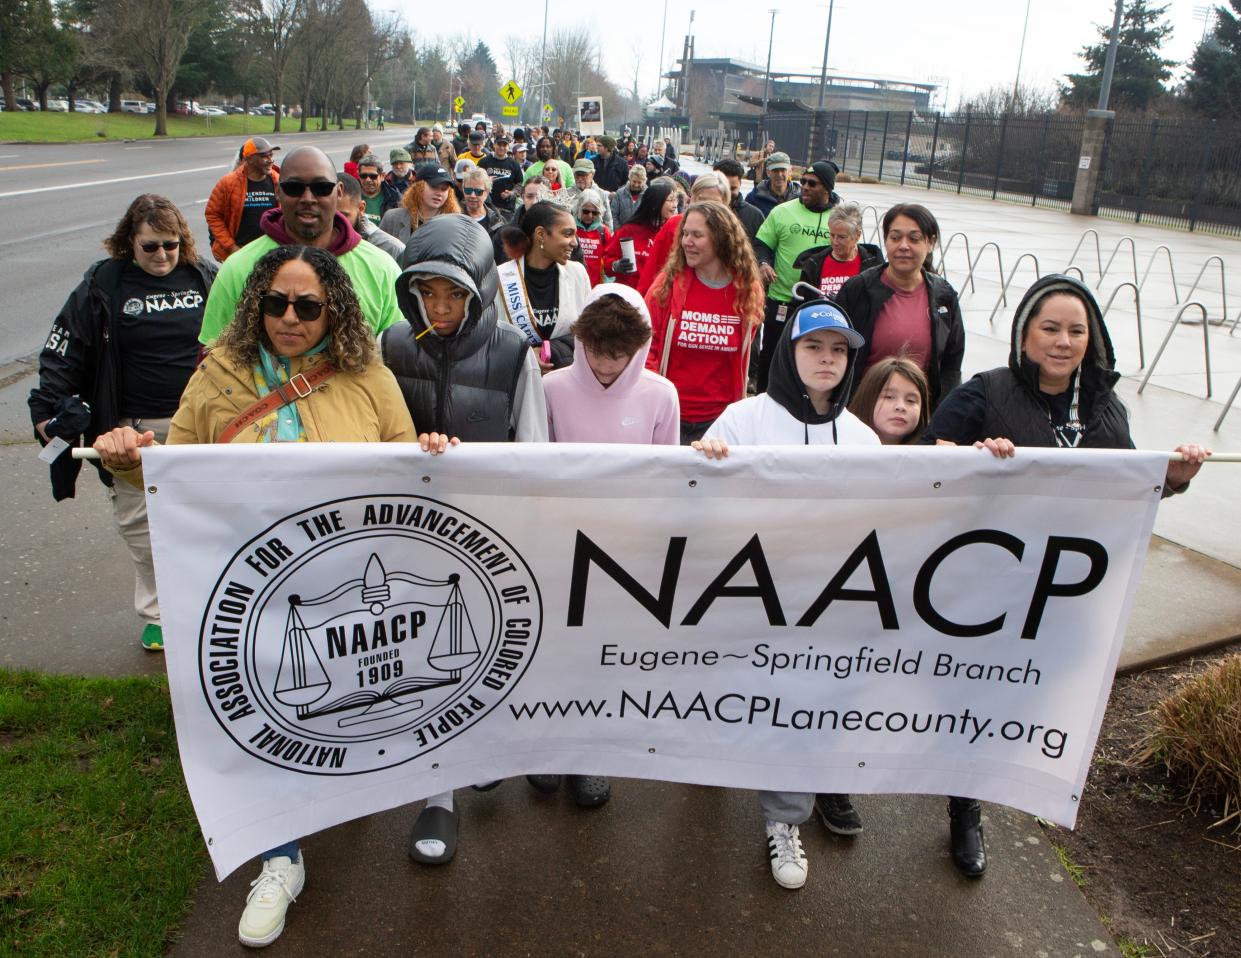 Marchers make their way along Dr. Martin Luther King Jr. Boulevard on Feb. 19 in Eugene in memory of King. The original march was canceled due to the ice storm last month.